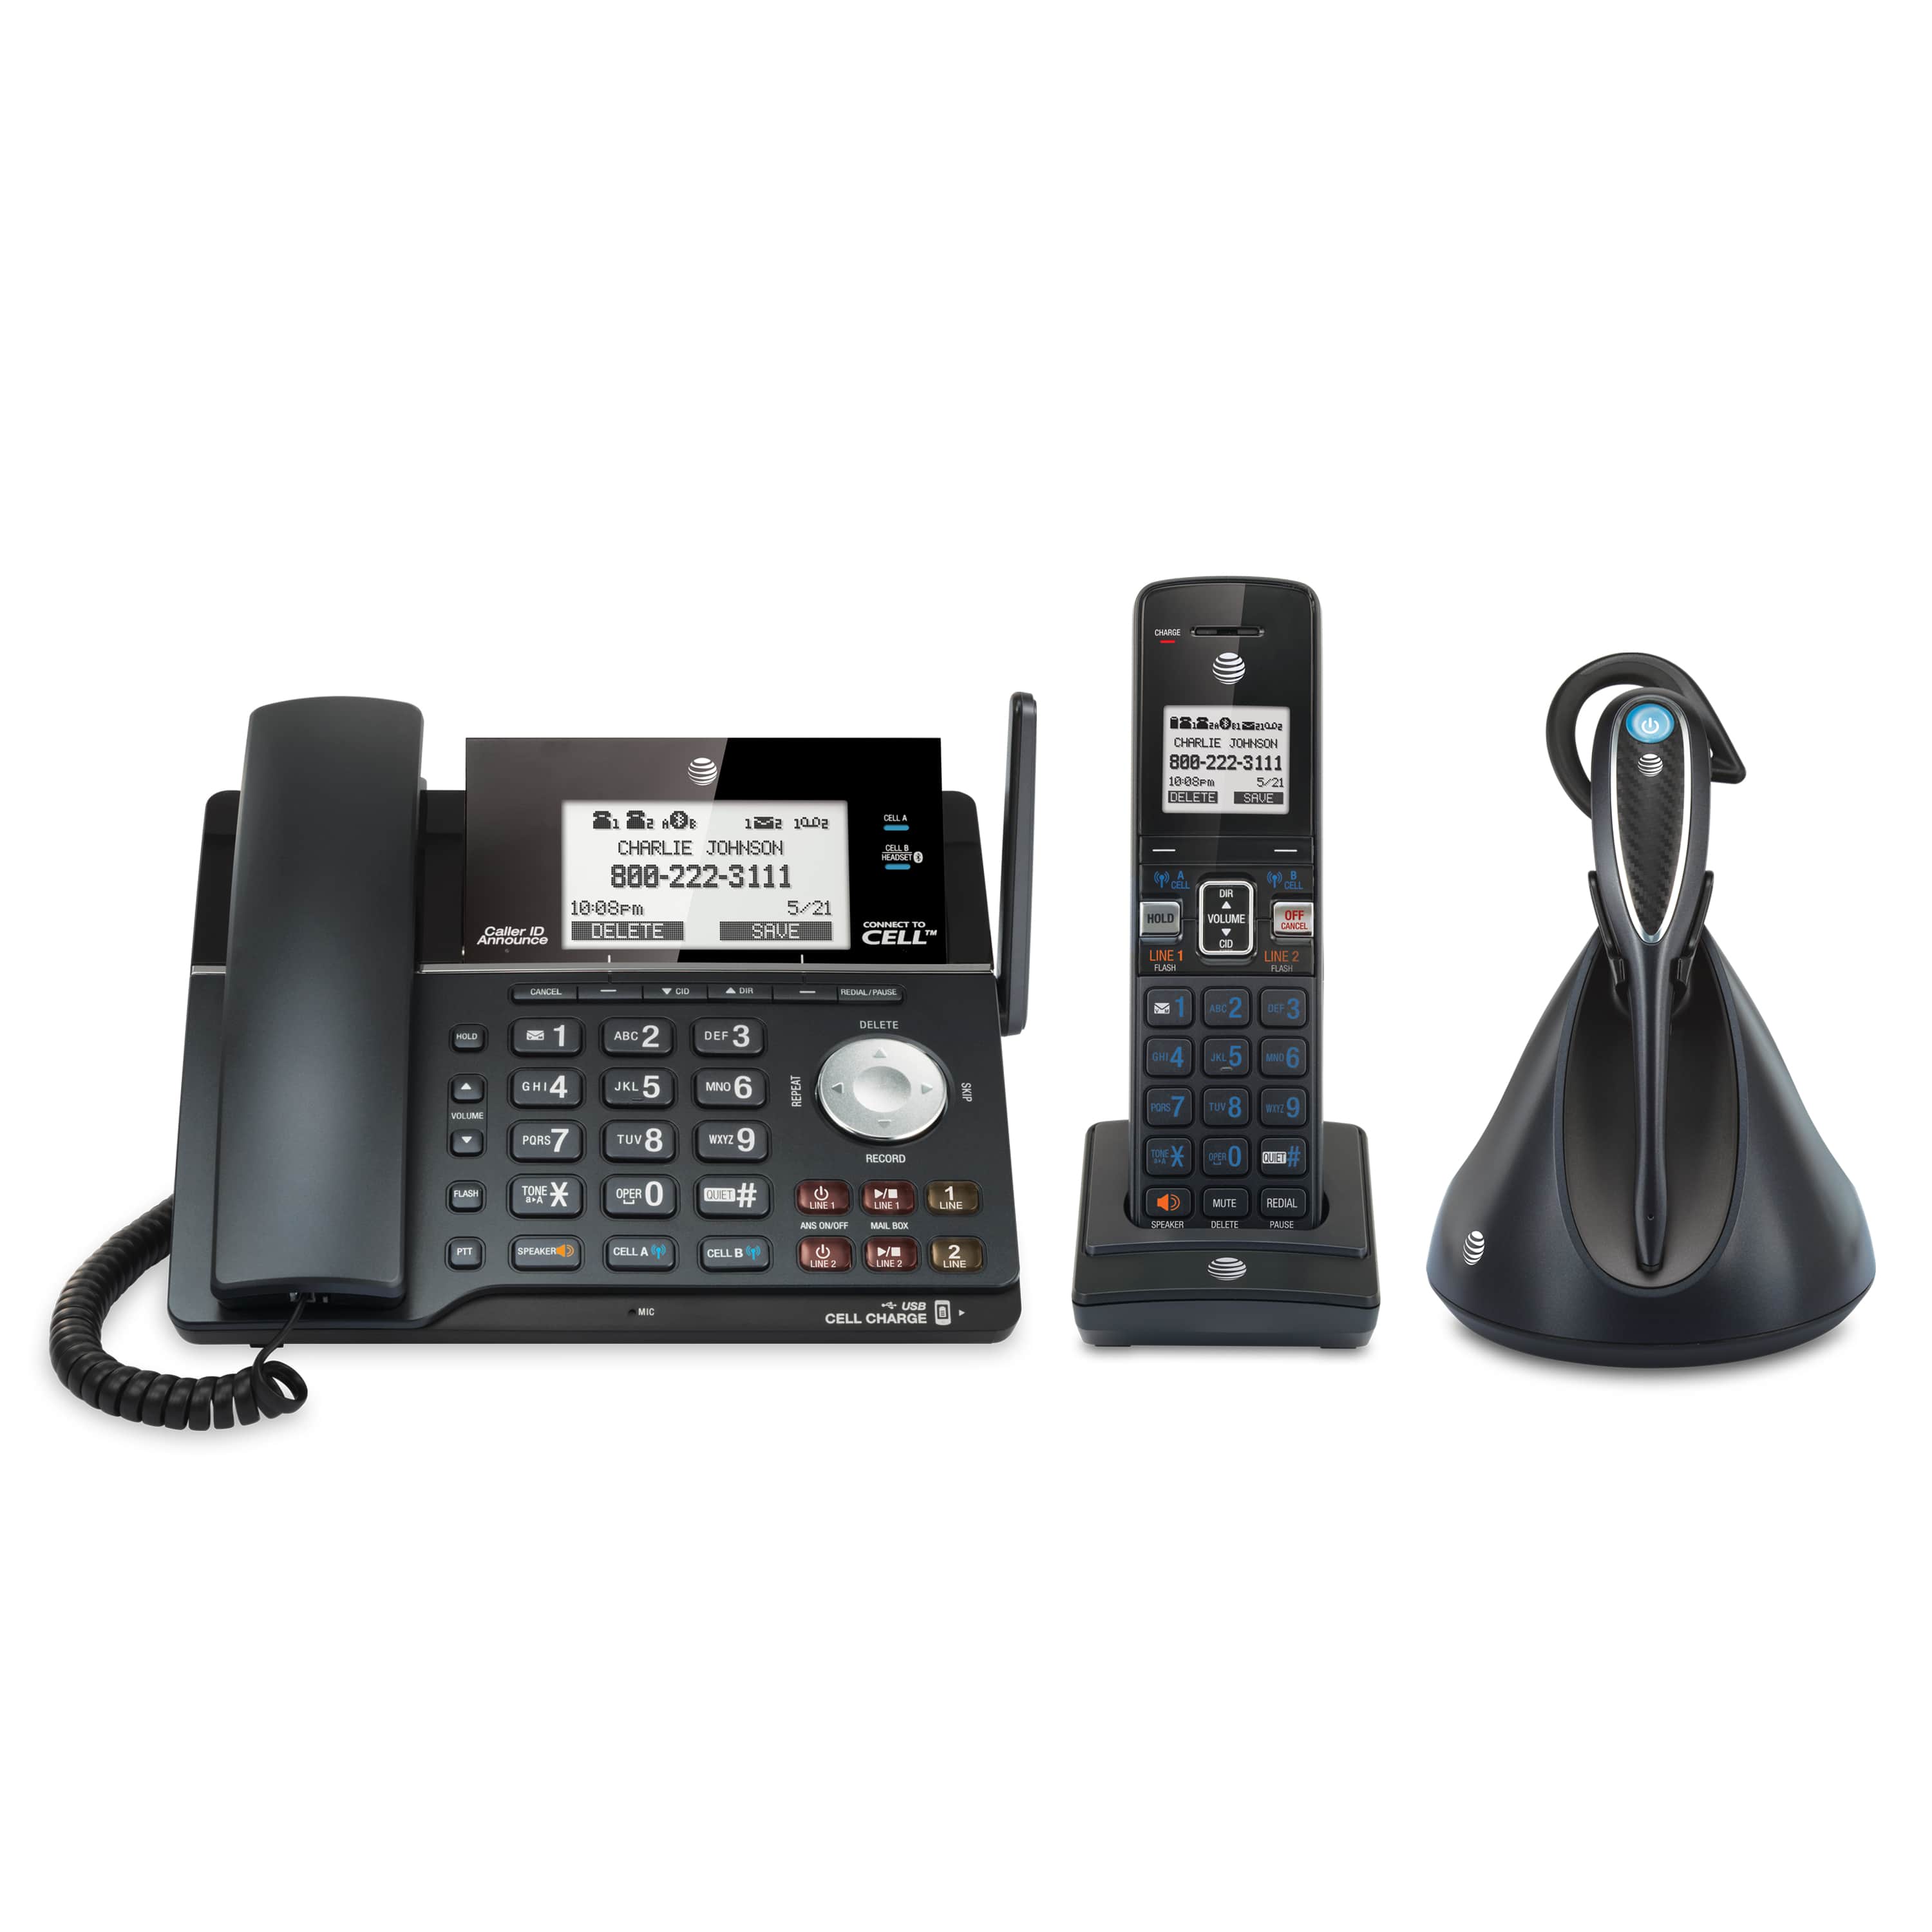 SILVER 18035S TEL UK SORRENTO 2PC DESK/WALL MOUNT CORDED PHONE 